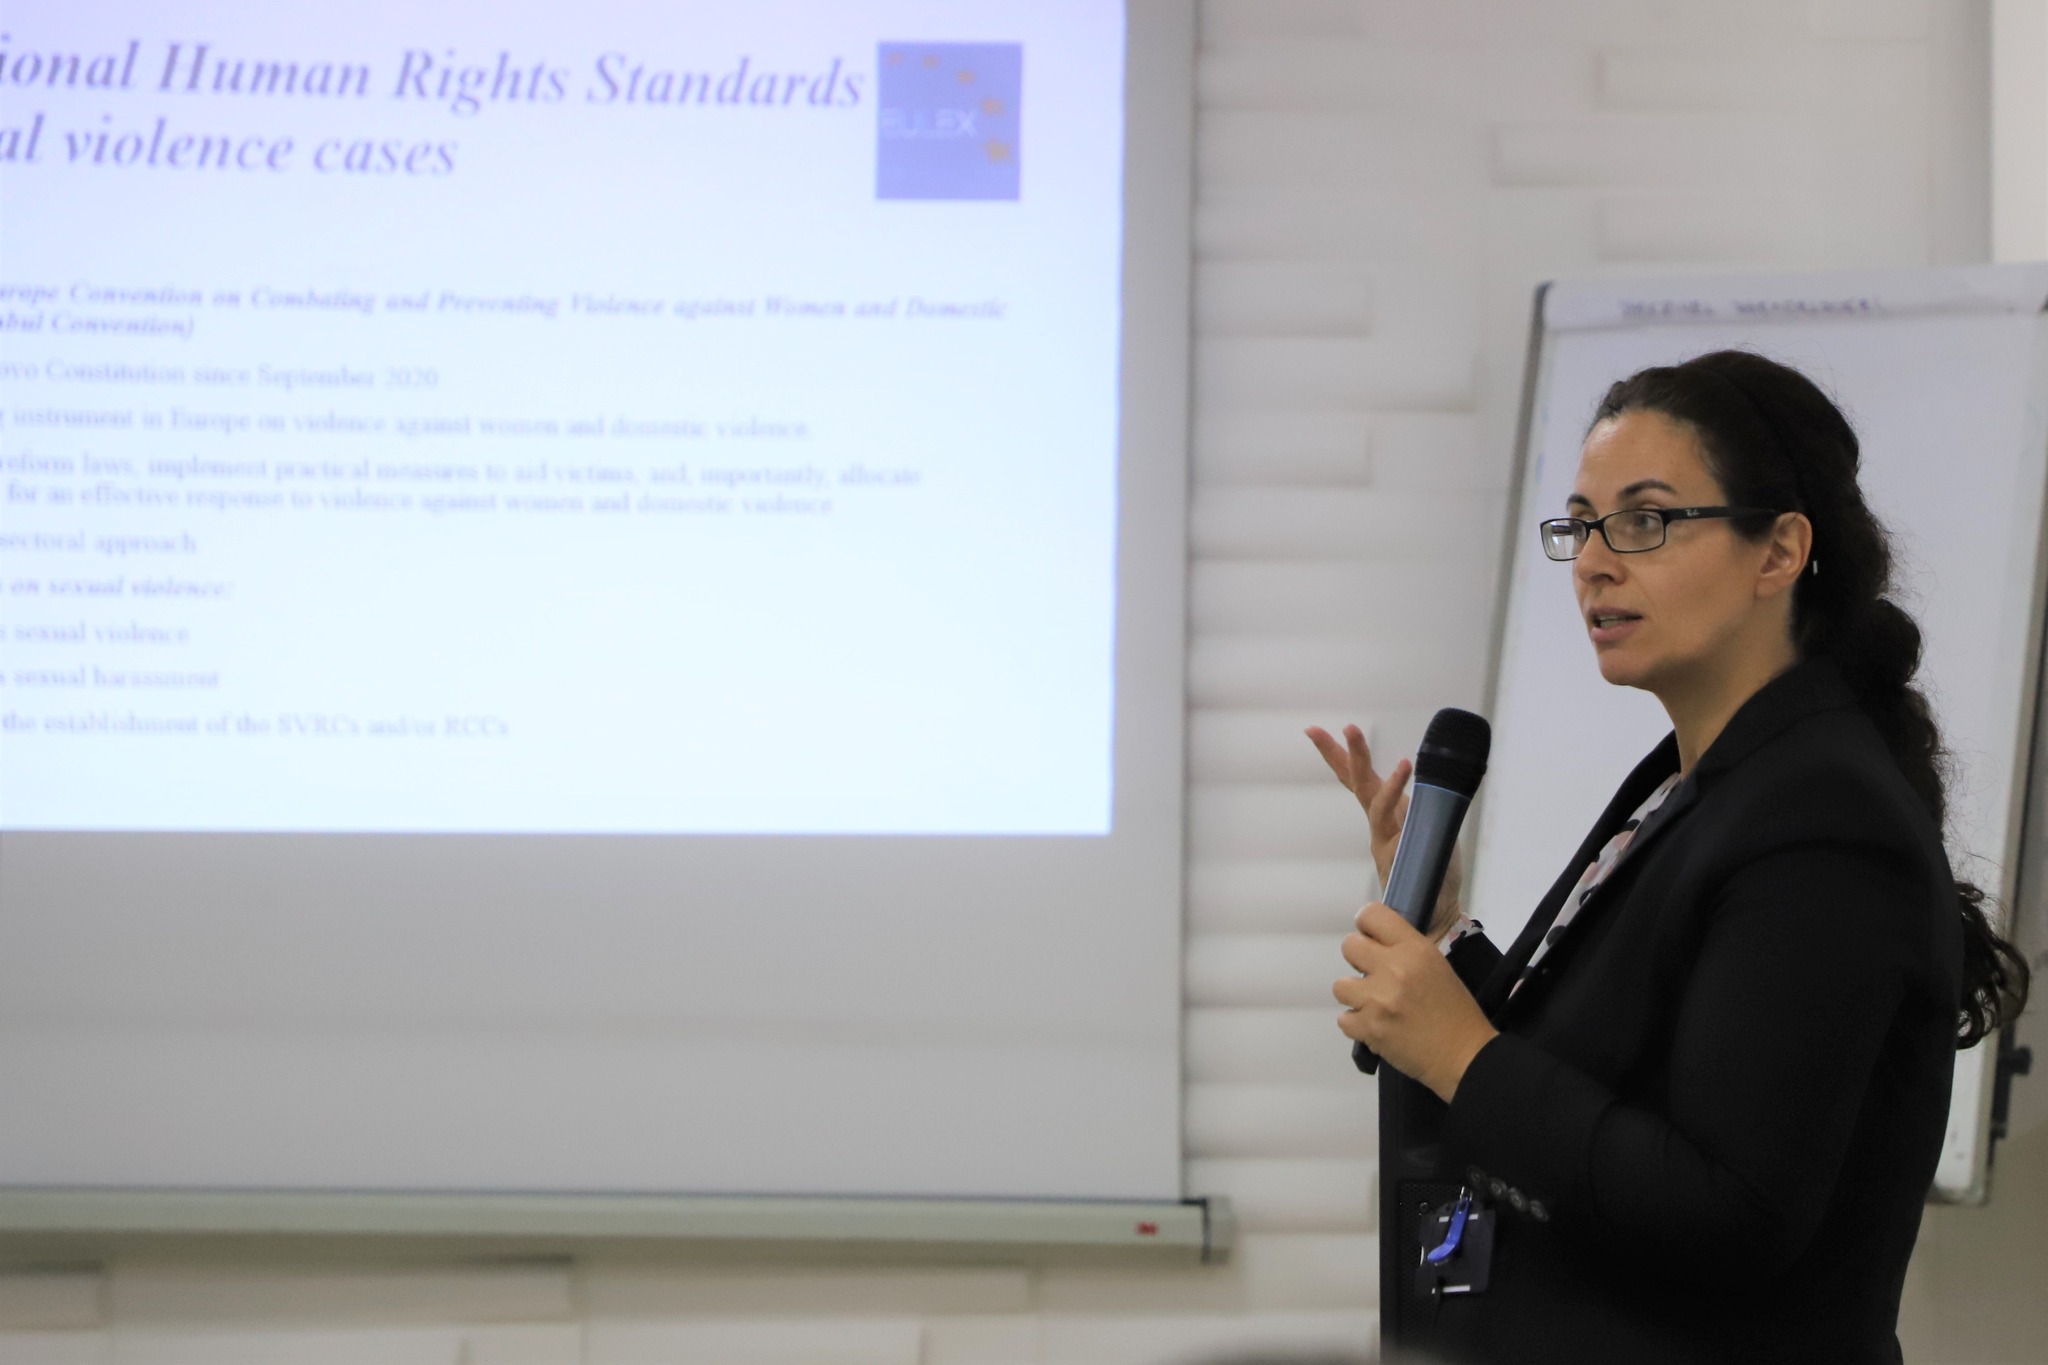 EULEX’s Gender Advisor Presents EULEX’s Work in the Fight against Sexual Violence